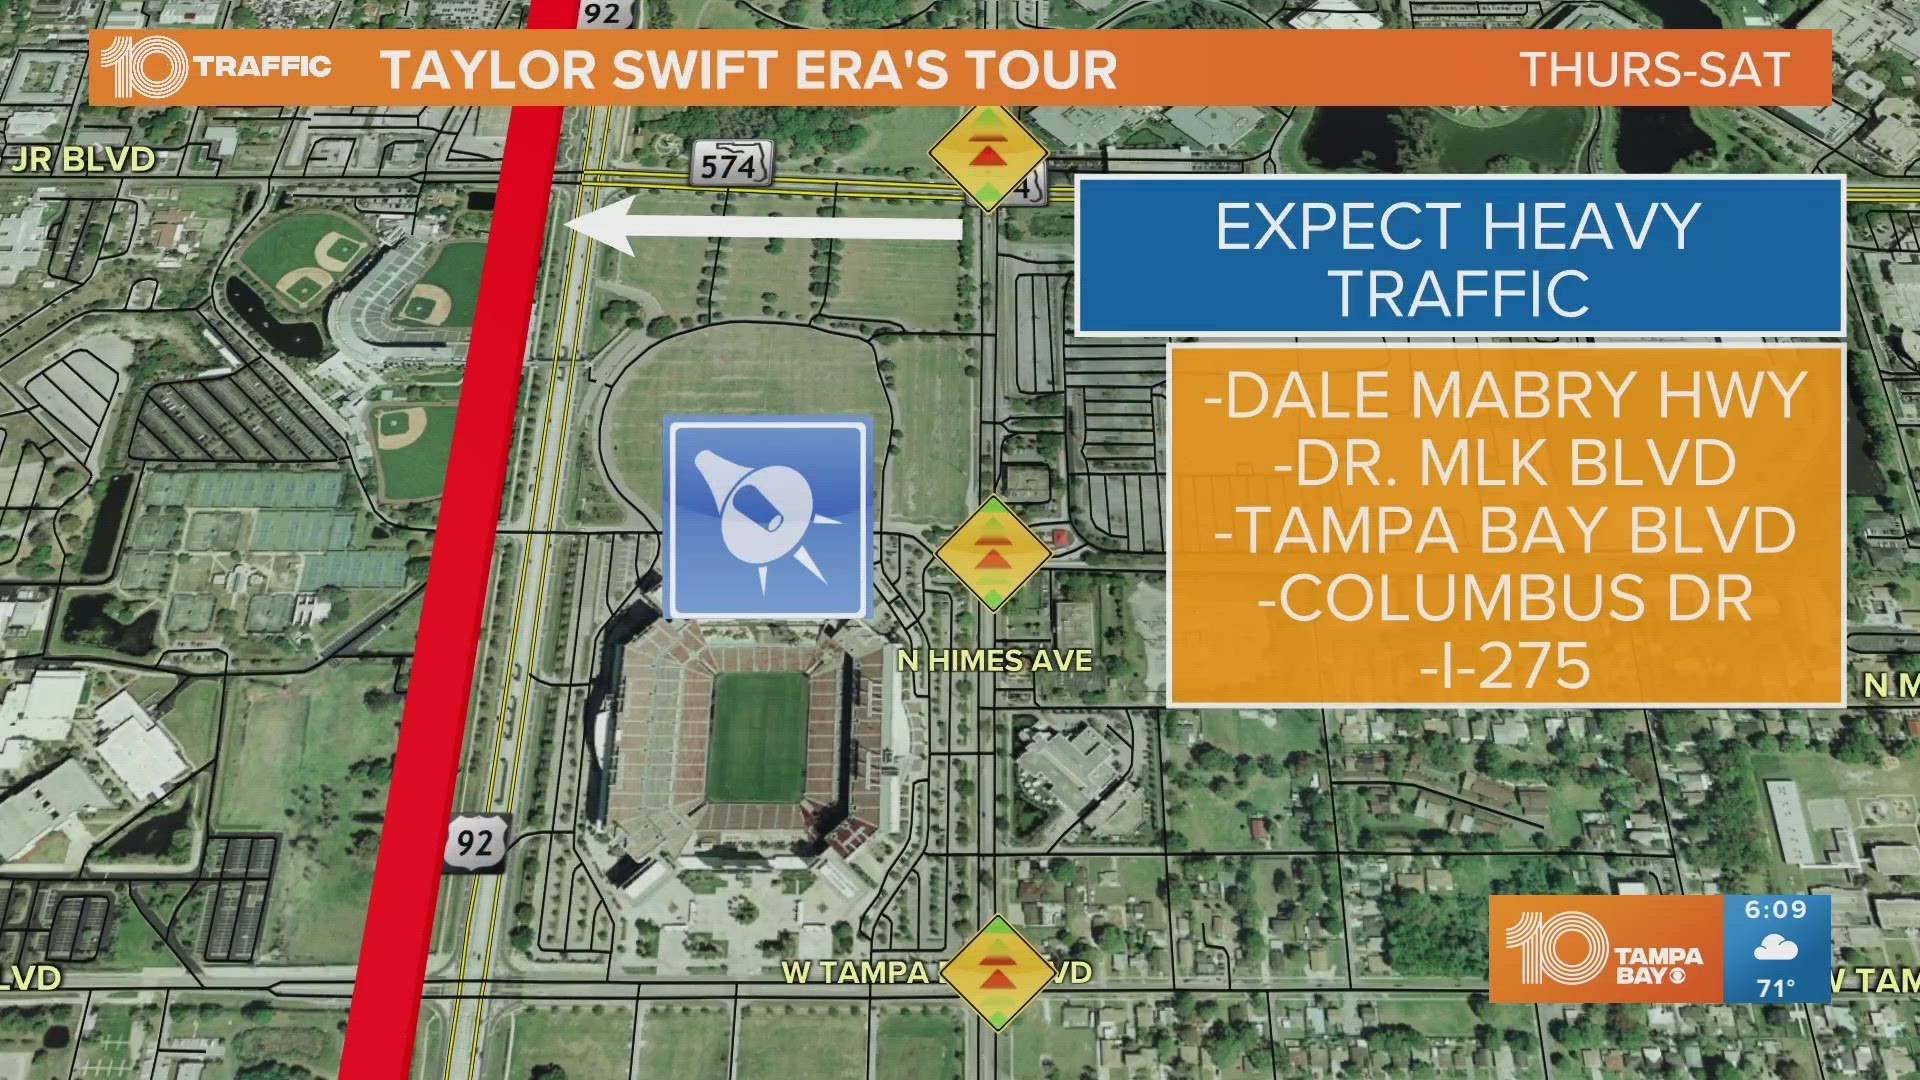 Taylor Swift is bringing her Eras Tour to Tampa for three nights this week: April 13, 14 and 15.